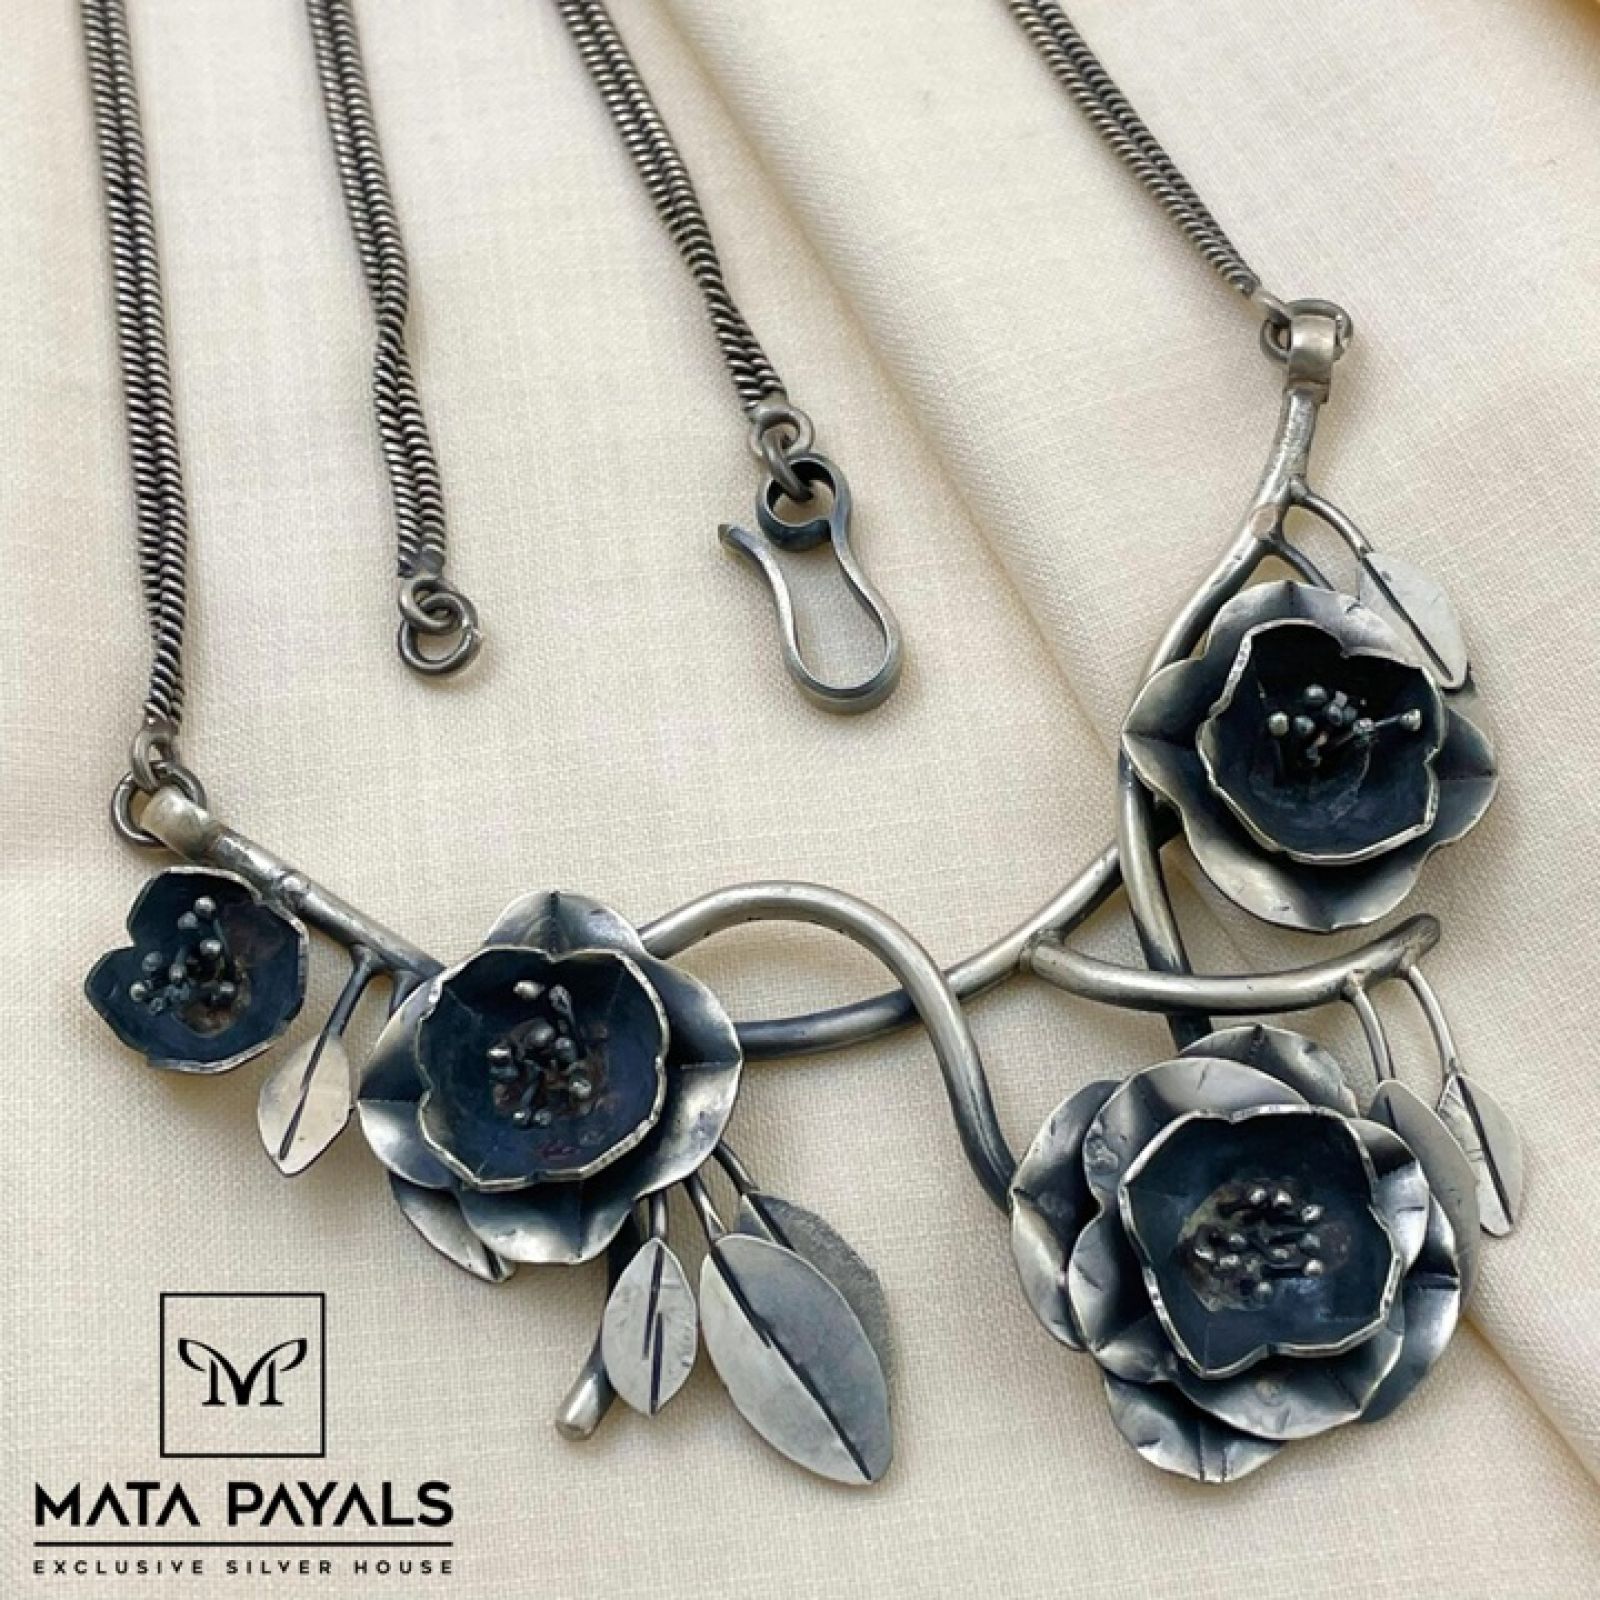 Tribal Floral Oxidised Necklace